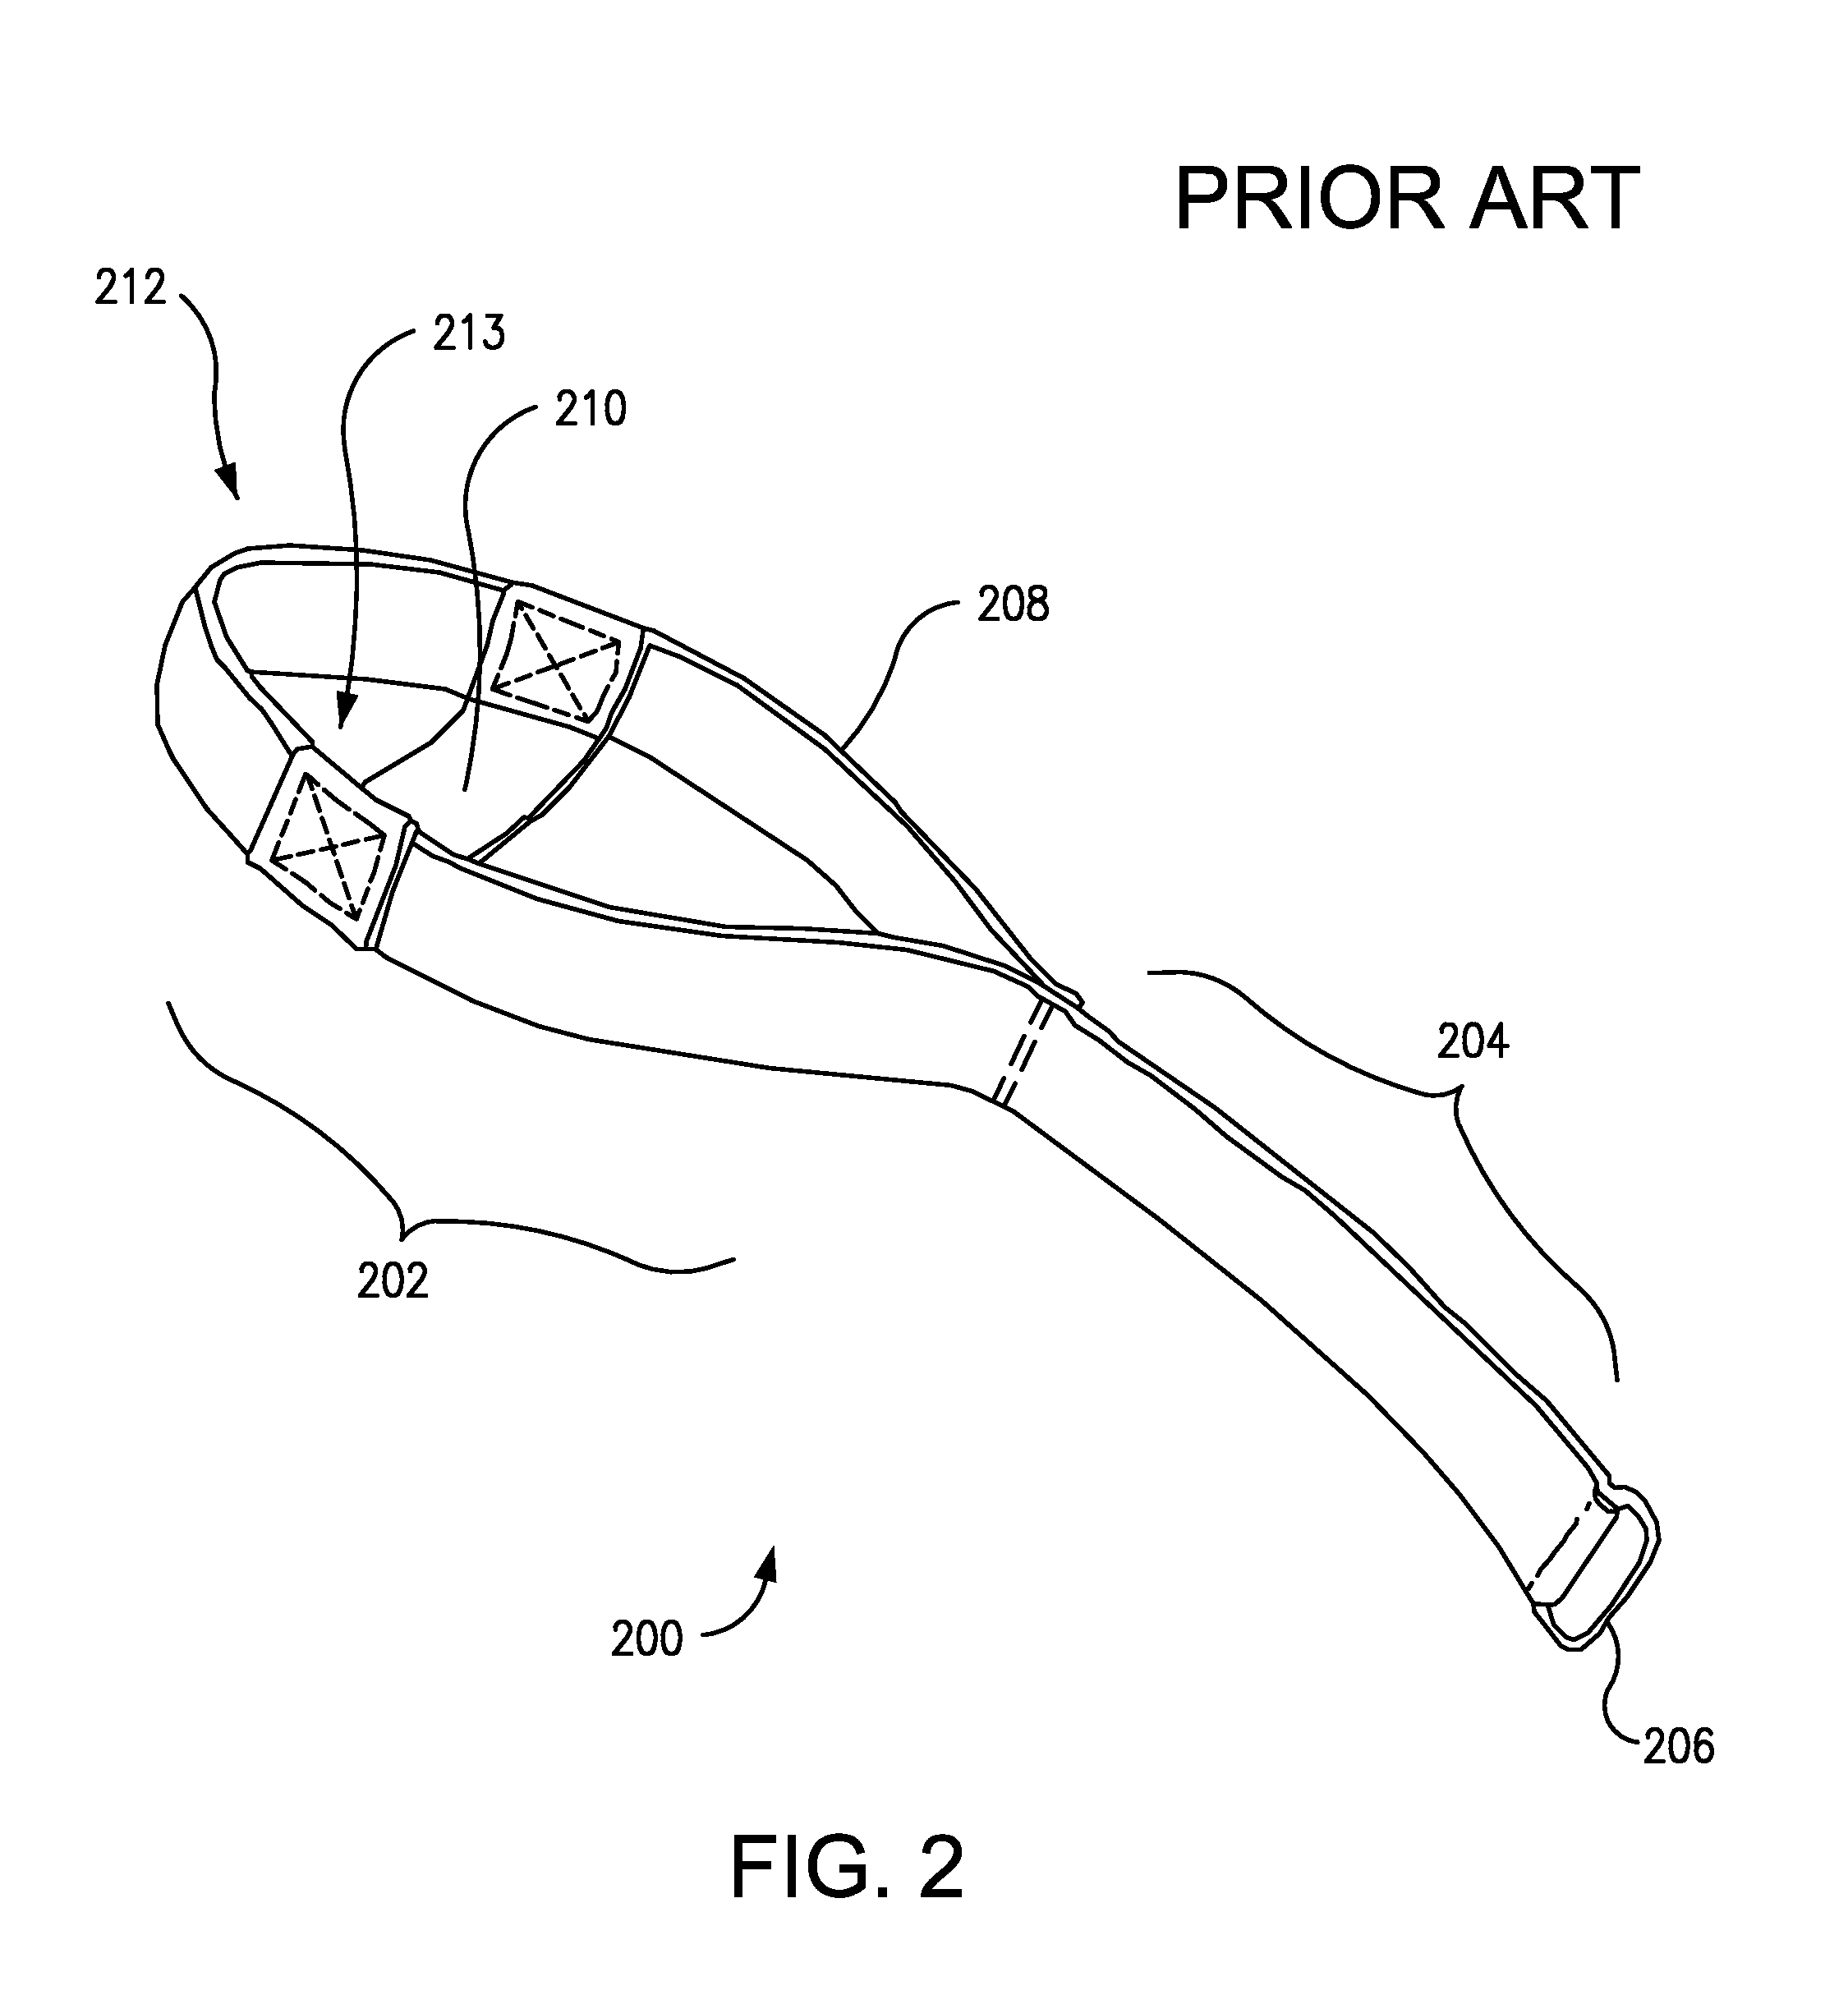 Lower Extremity Receiving Device for Providing Enhanced Leg Mobility During Lower Body Exercise